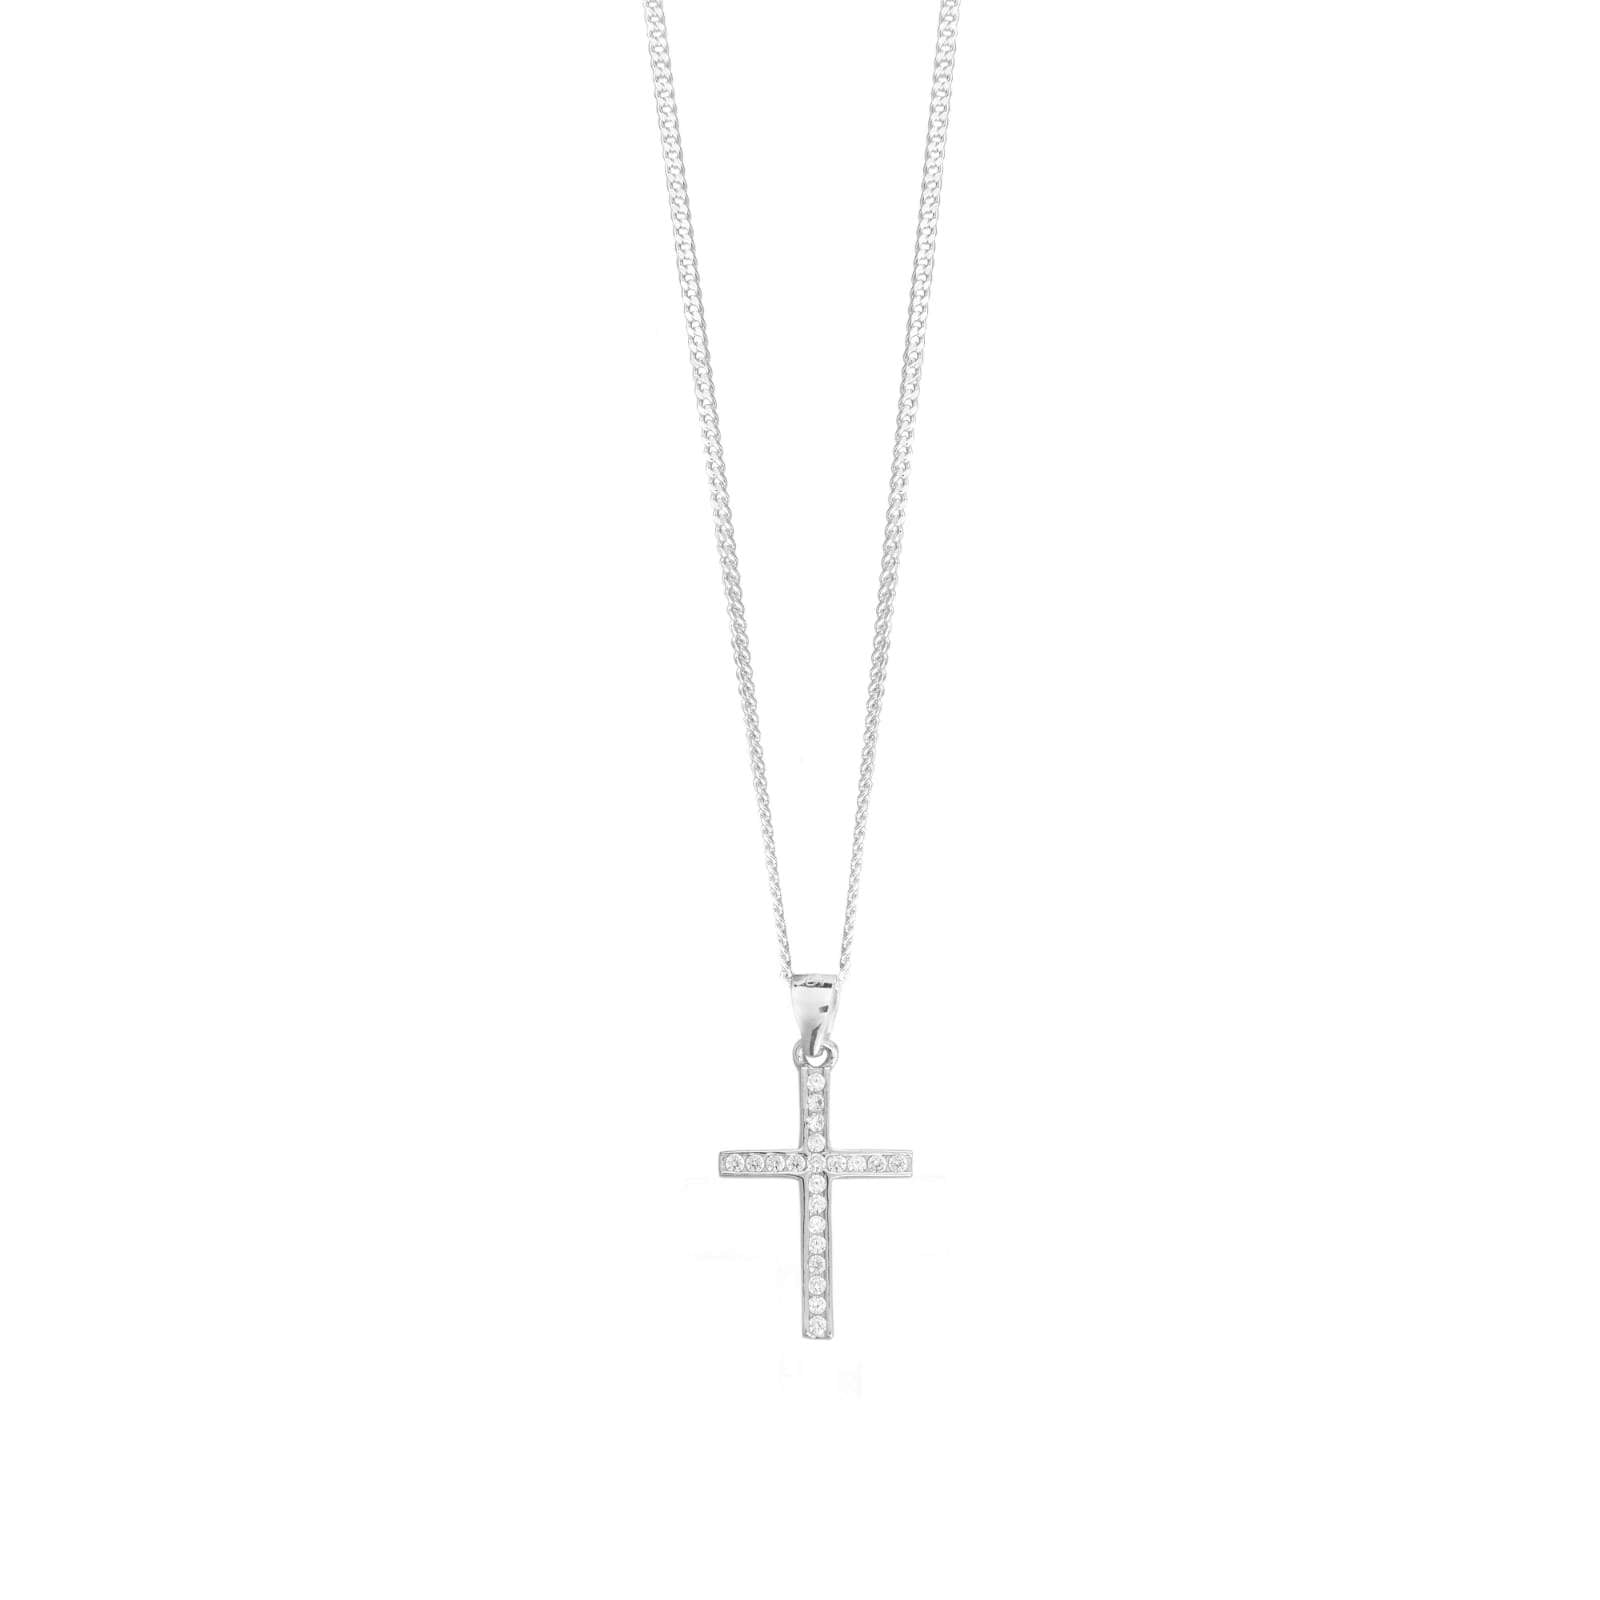 Rockabye Baby Cross Necklace - Sterling Silver with CZ Stones - SayItWithDiamonds.com